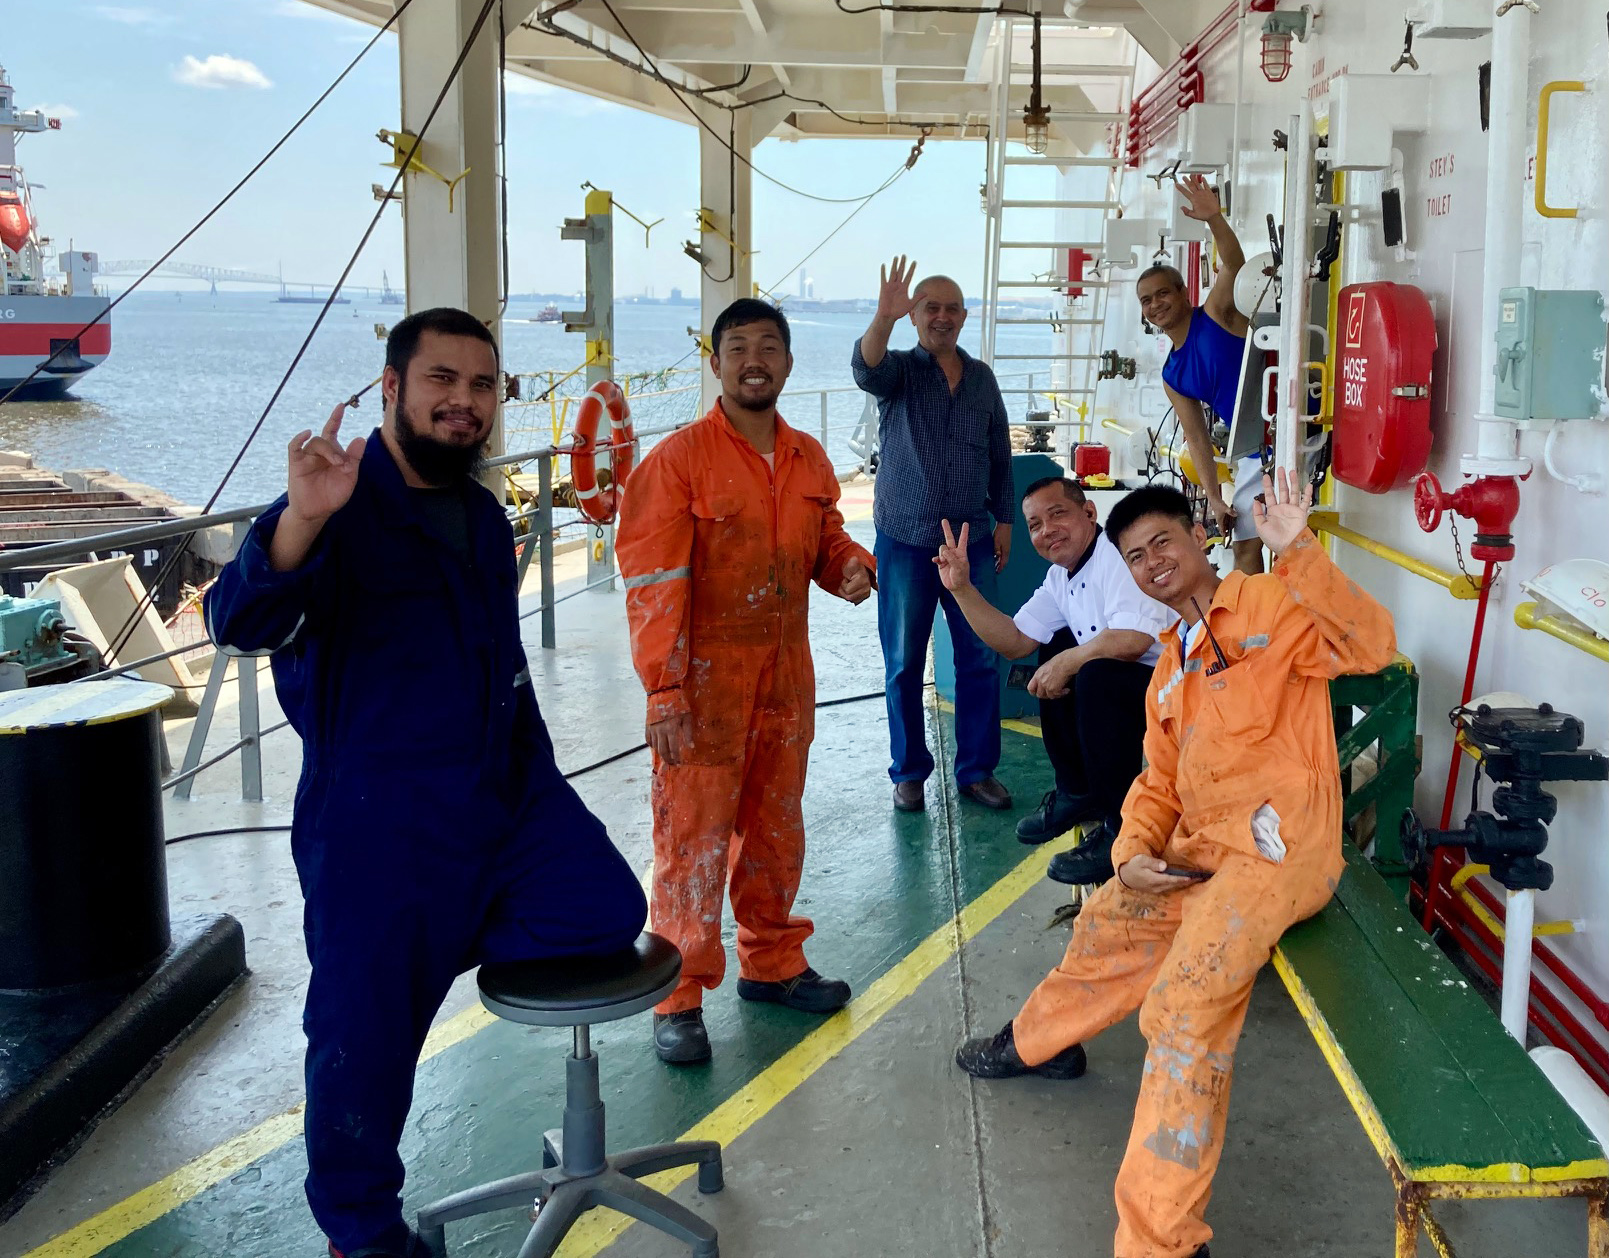 A crew of seafarers aboard their ship docked at the Port of Baltimore in Maryland. The Francis Scott Key Bridge is visible in the top left of the photo. (Photo by Maggie Schorr)